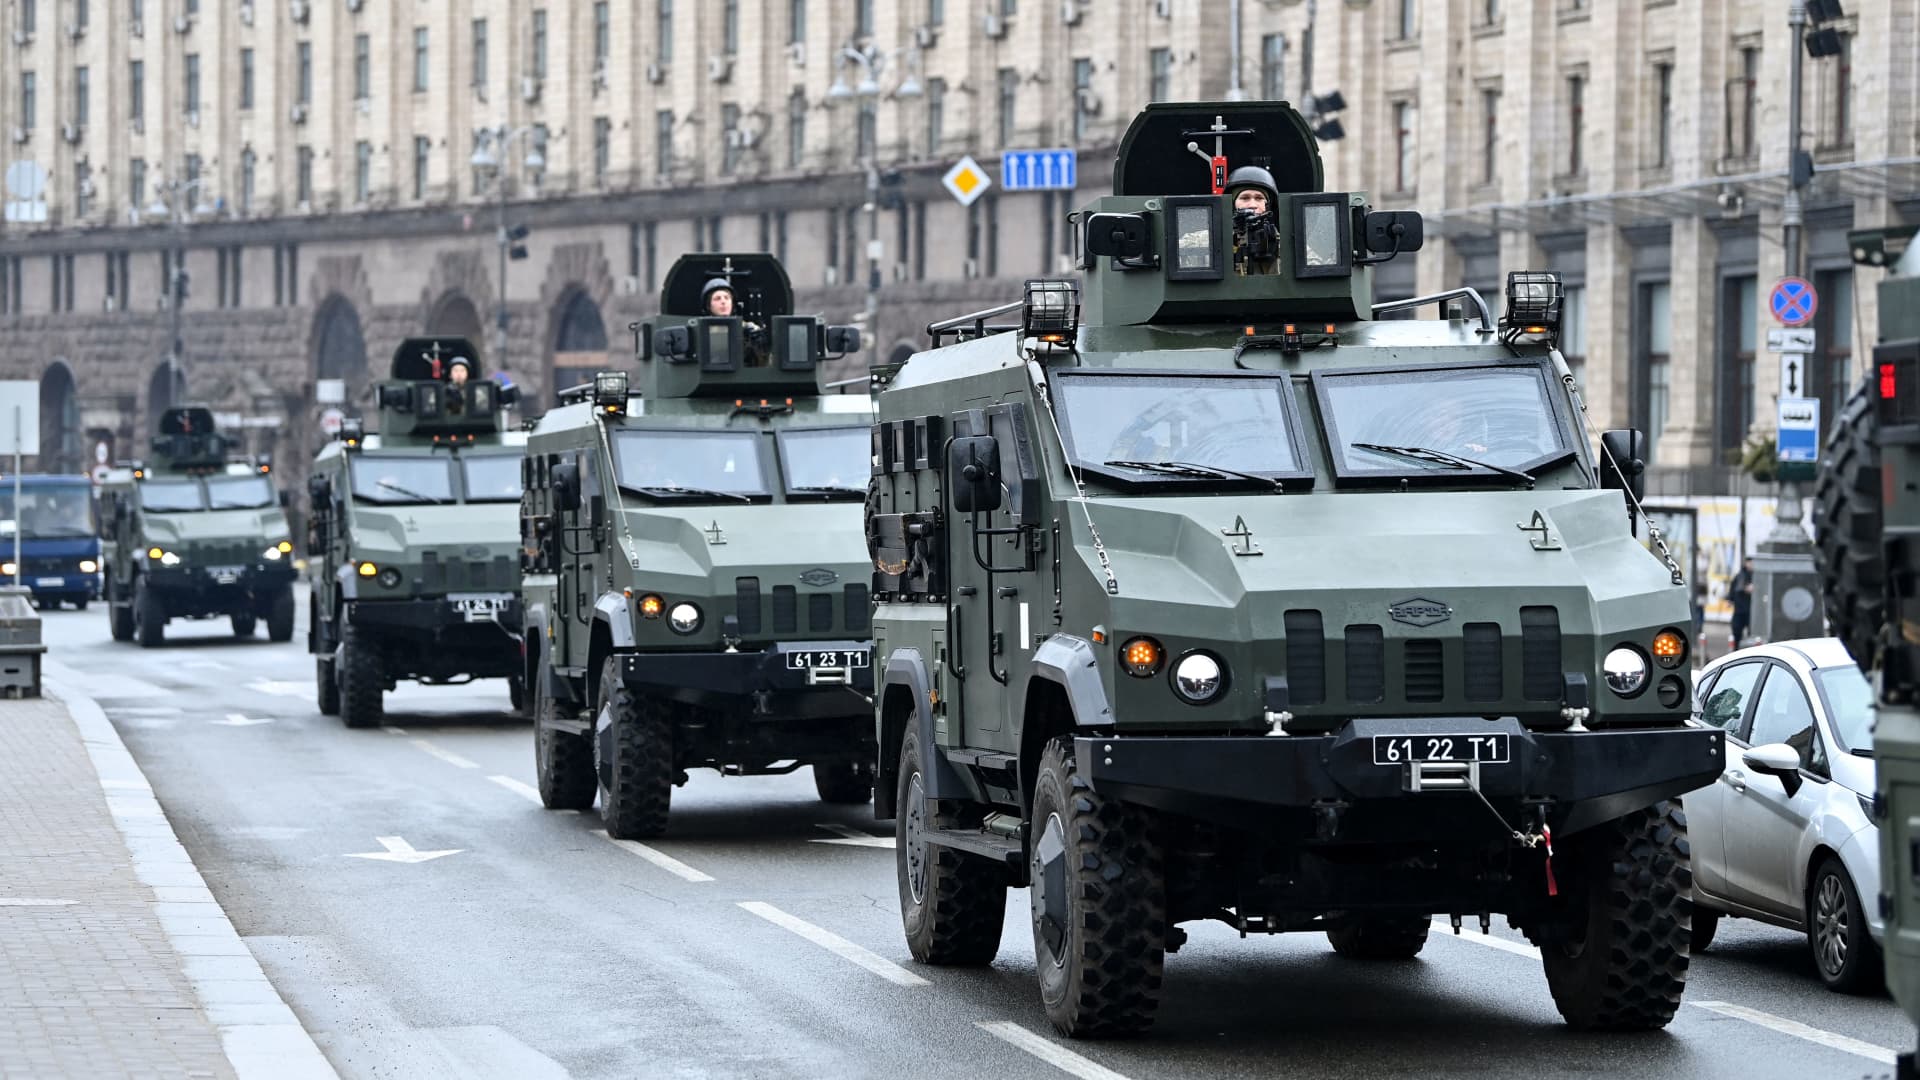 Ukrainian military vehicles move past Independence square in central Kyiv on February 24, 2022.